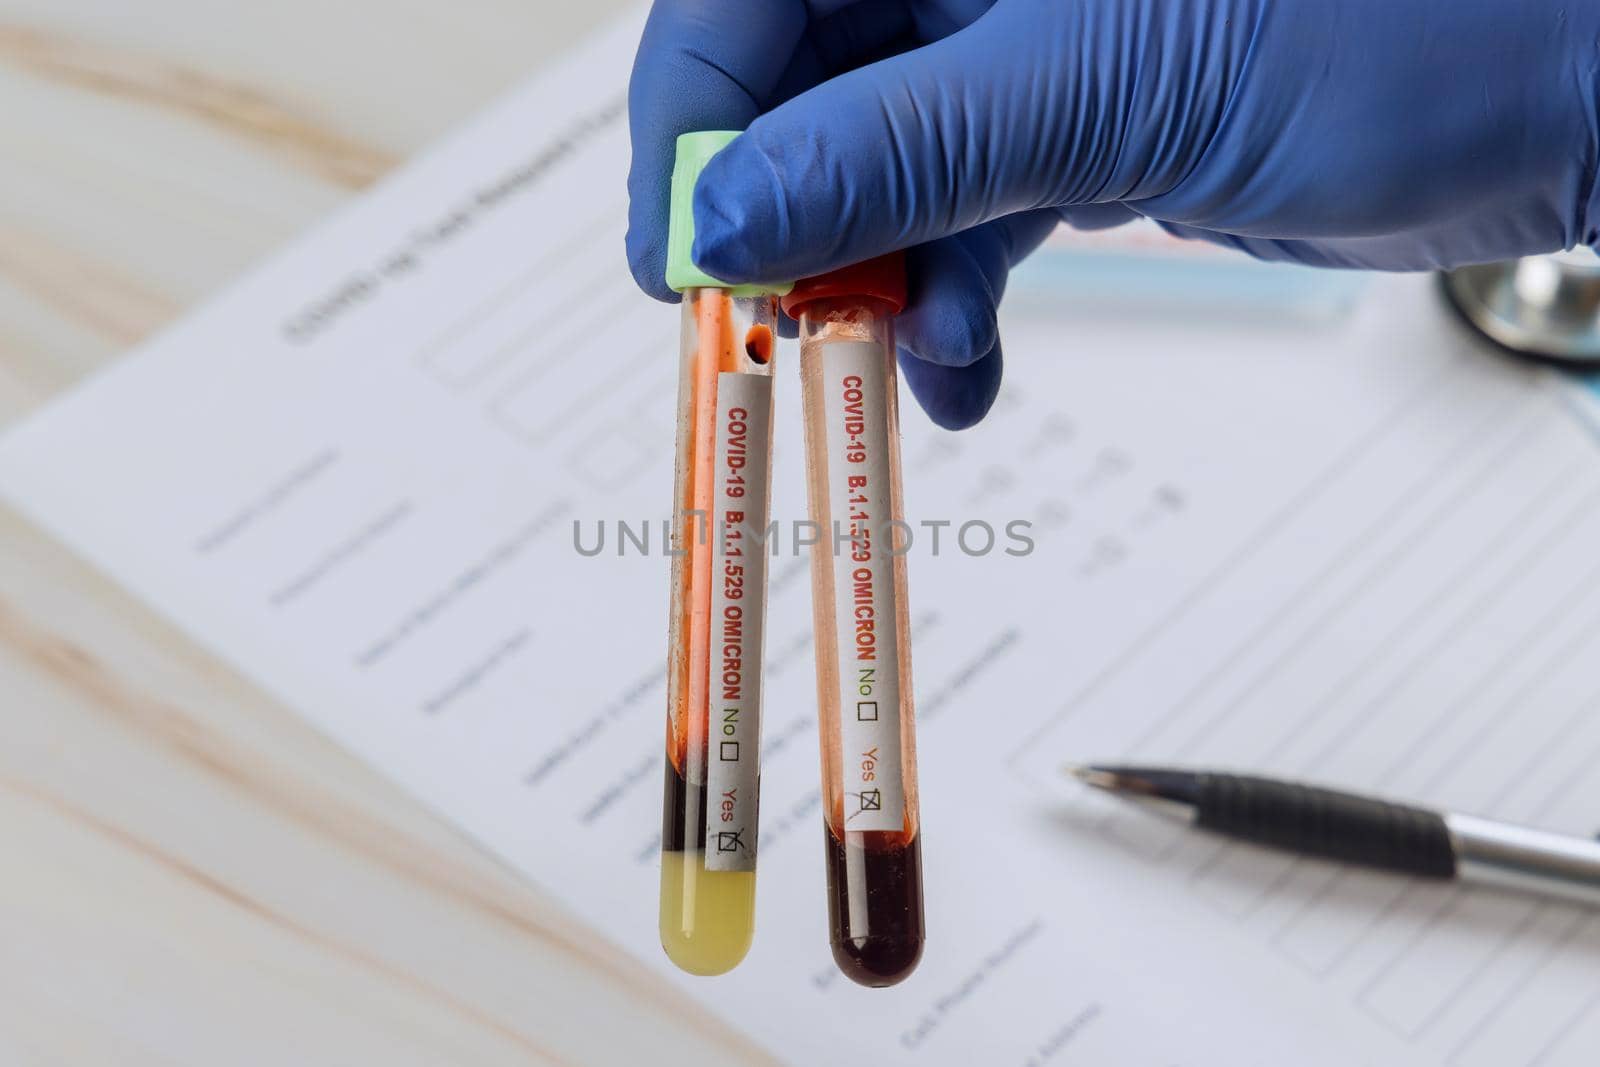 Test to detect new version Omicron COVID-19 coronavirus in patient samples blood by ungvar